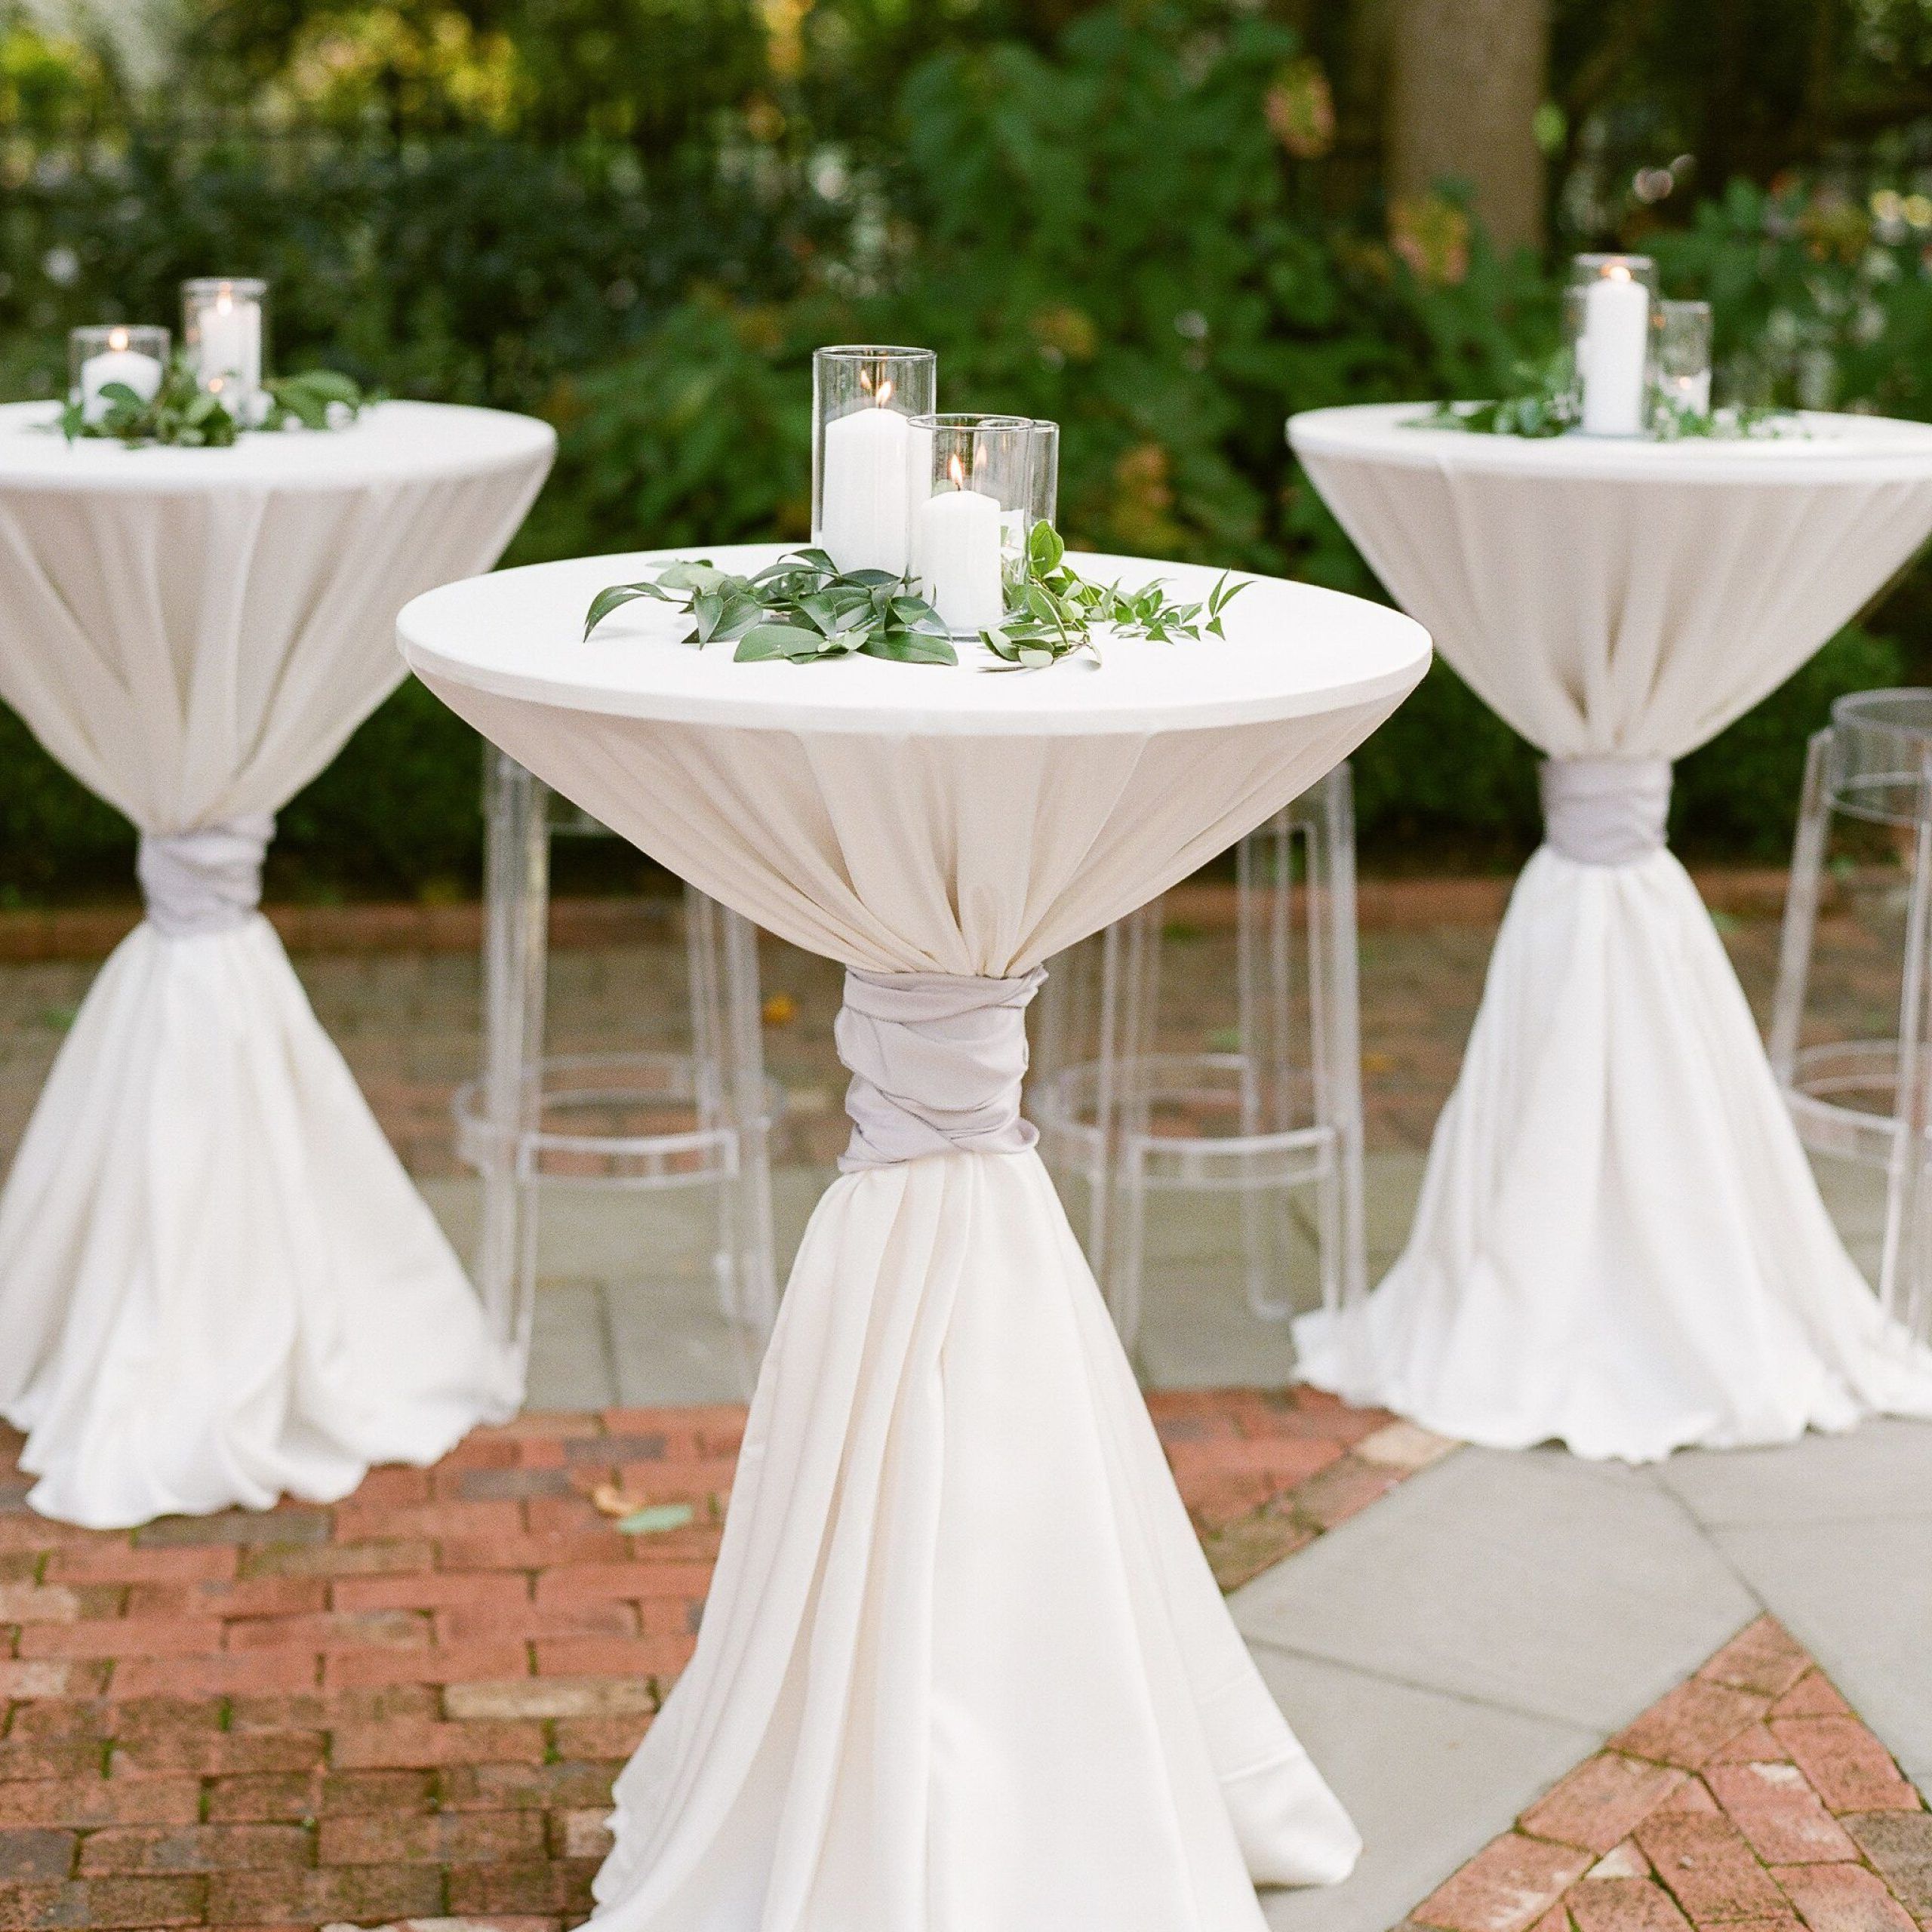 White Pillar Candles And Greenery Atop Cocktail Tables | Wedding With Regard To Natural Outdoor Cocktail Tables (View 9 of 20)